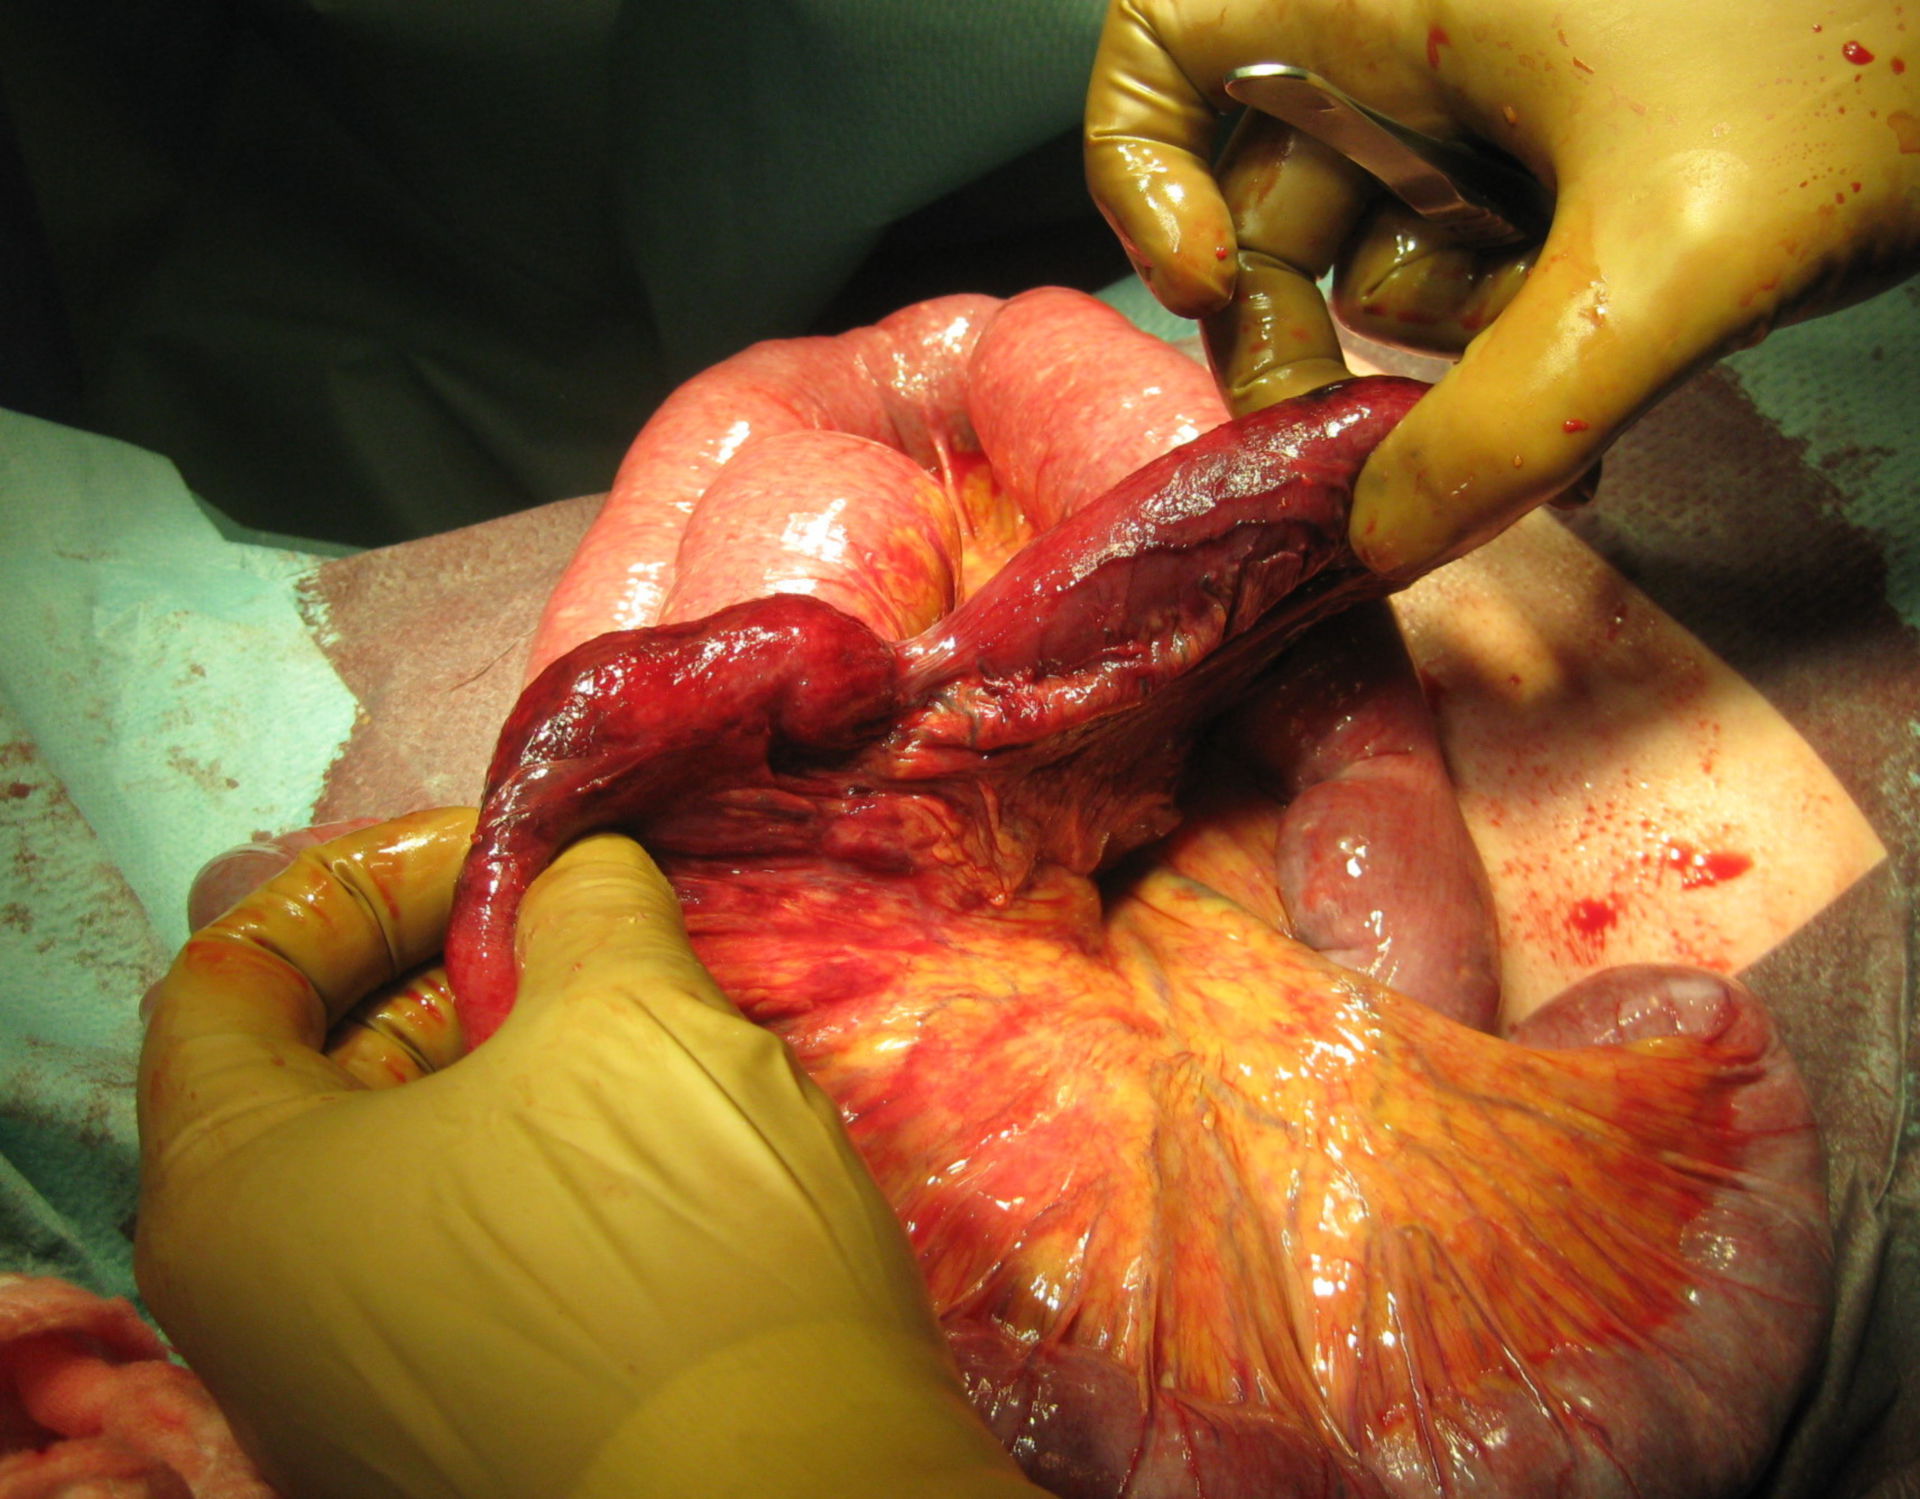 Adhesions of the small intestine leading to ileus and necrosis